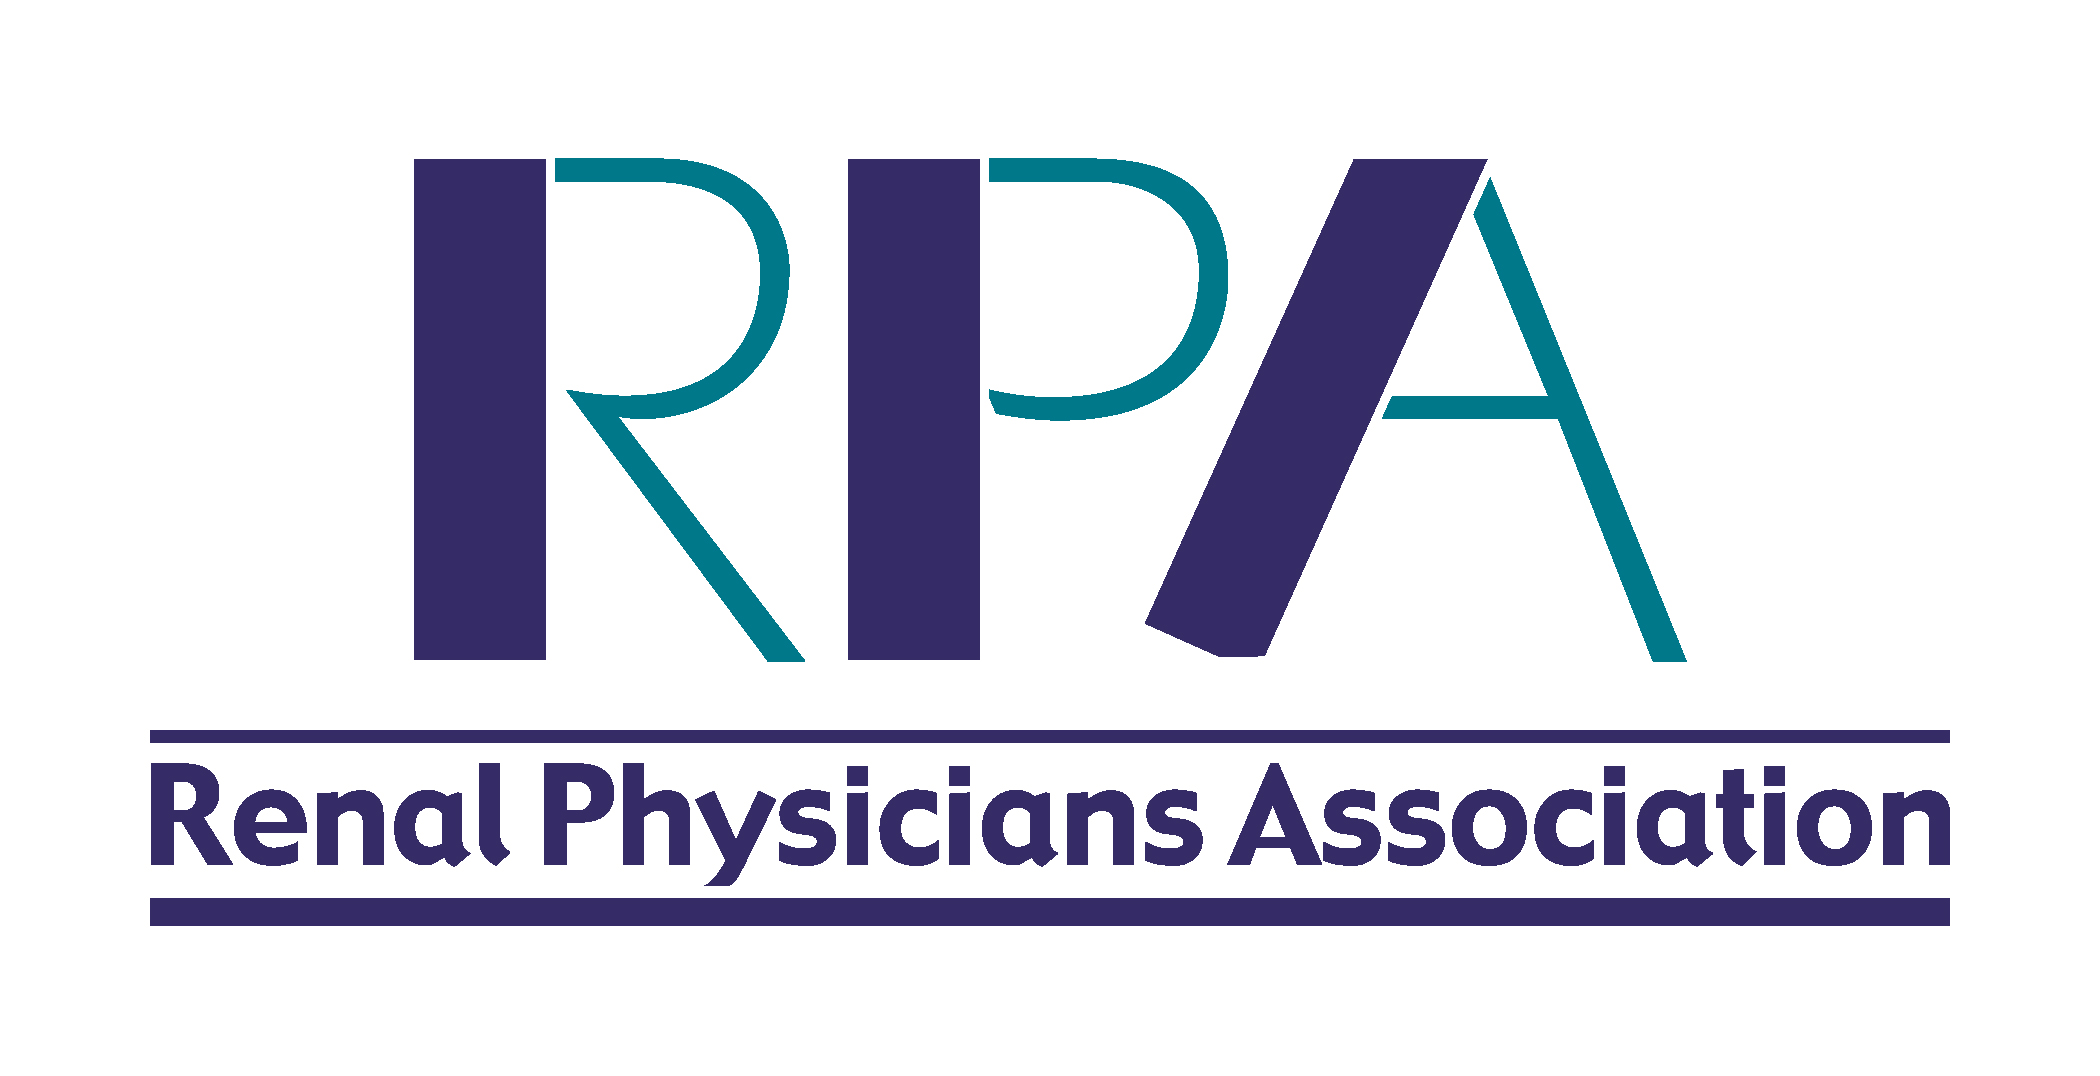 RPA 2022 - The Renal Physicians Association's Annual Meeting